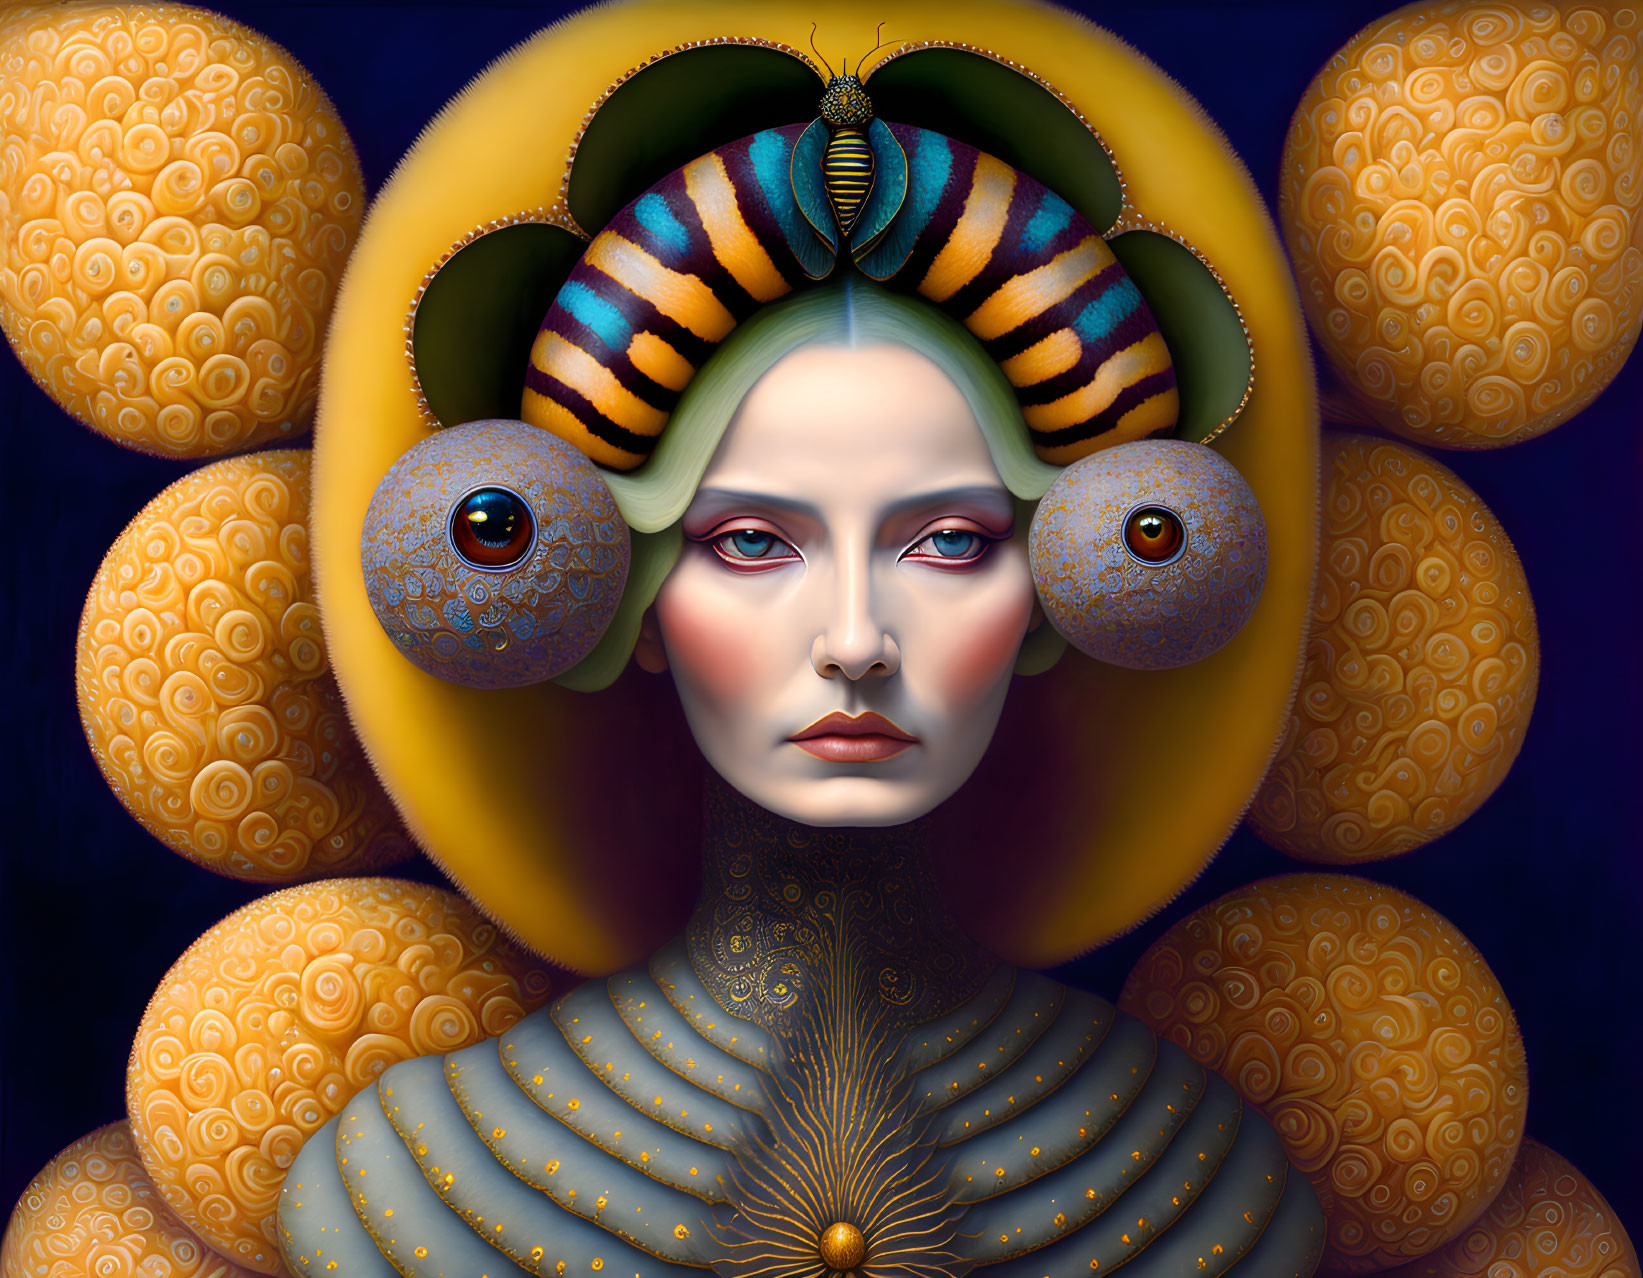 Surreal portrait featuring person with pale skin and large blue eyes